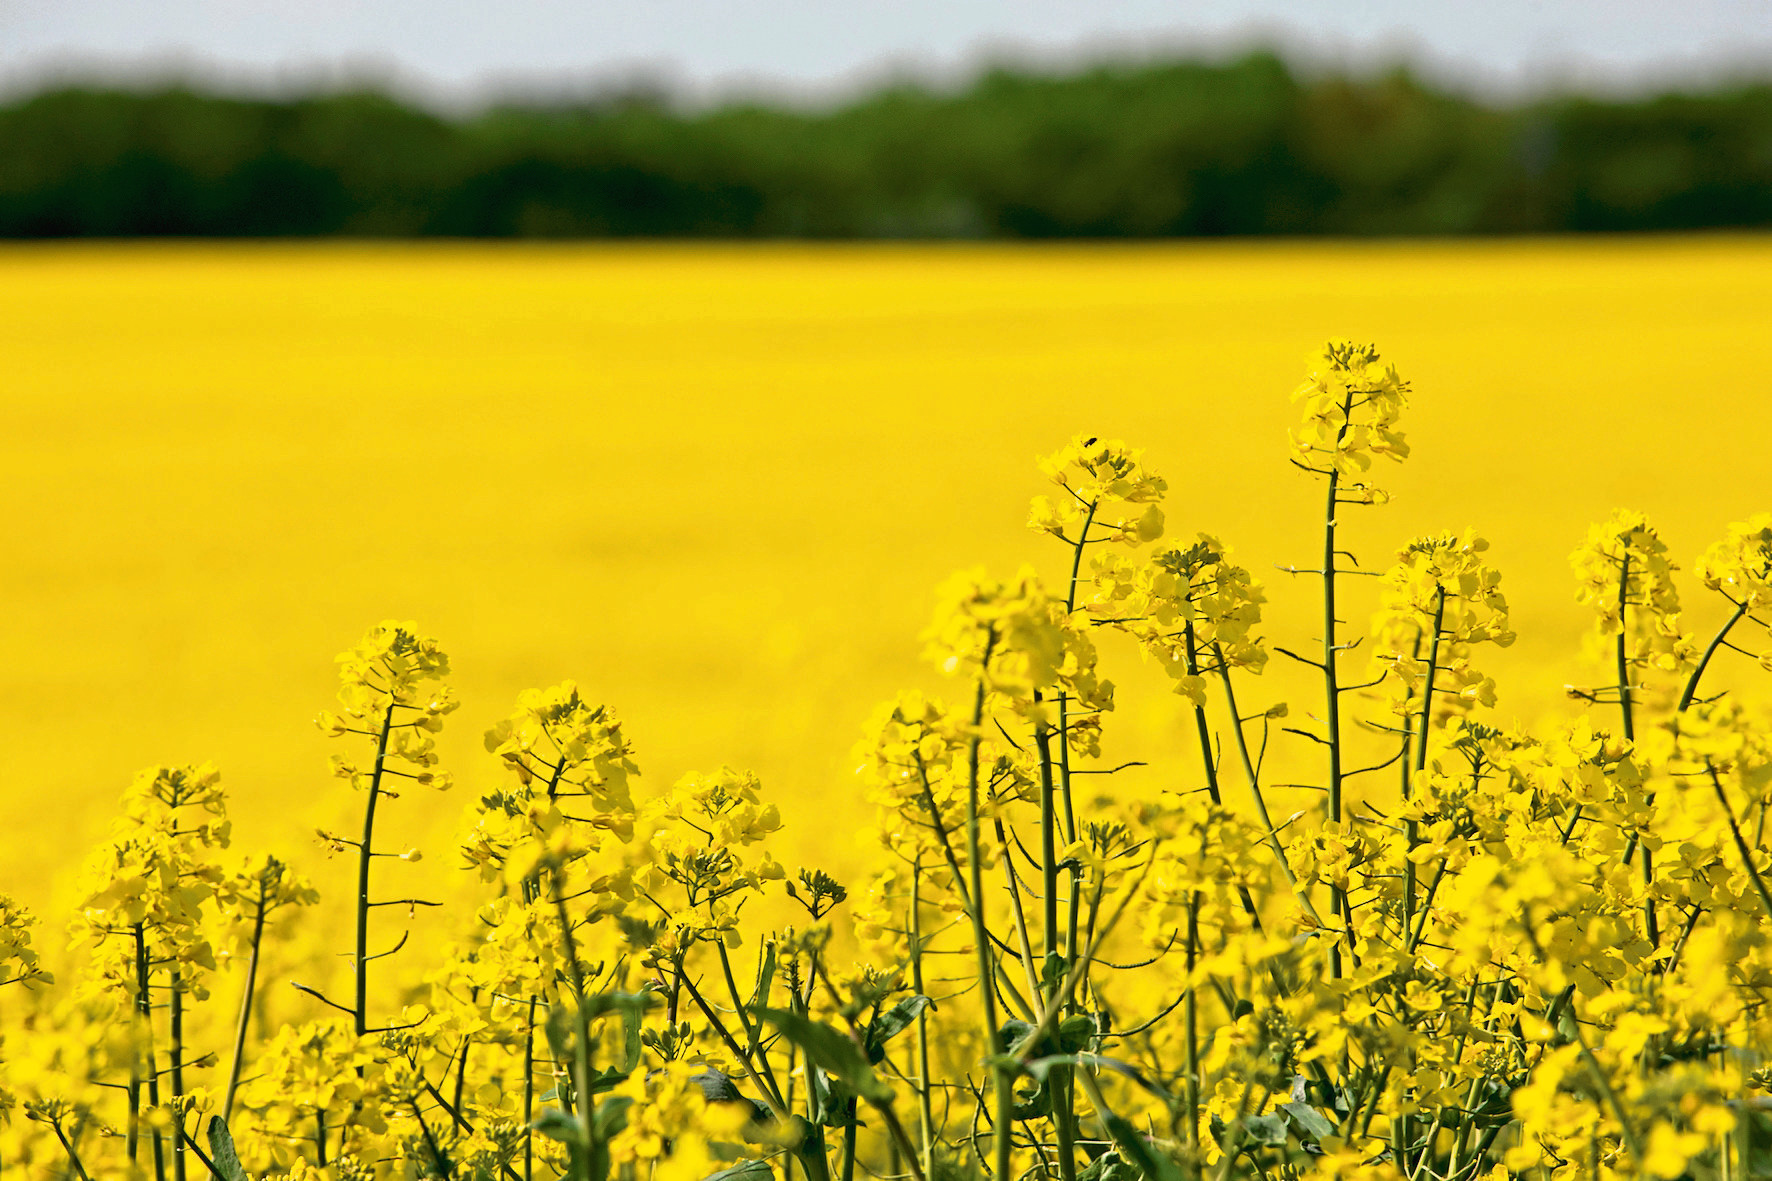 Mr Nicholson said the collapse of the UK oilseed rape market was an example of the impact of allowing lower standard imports into the country.